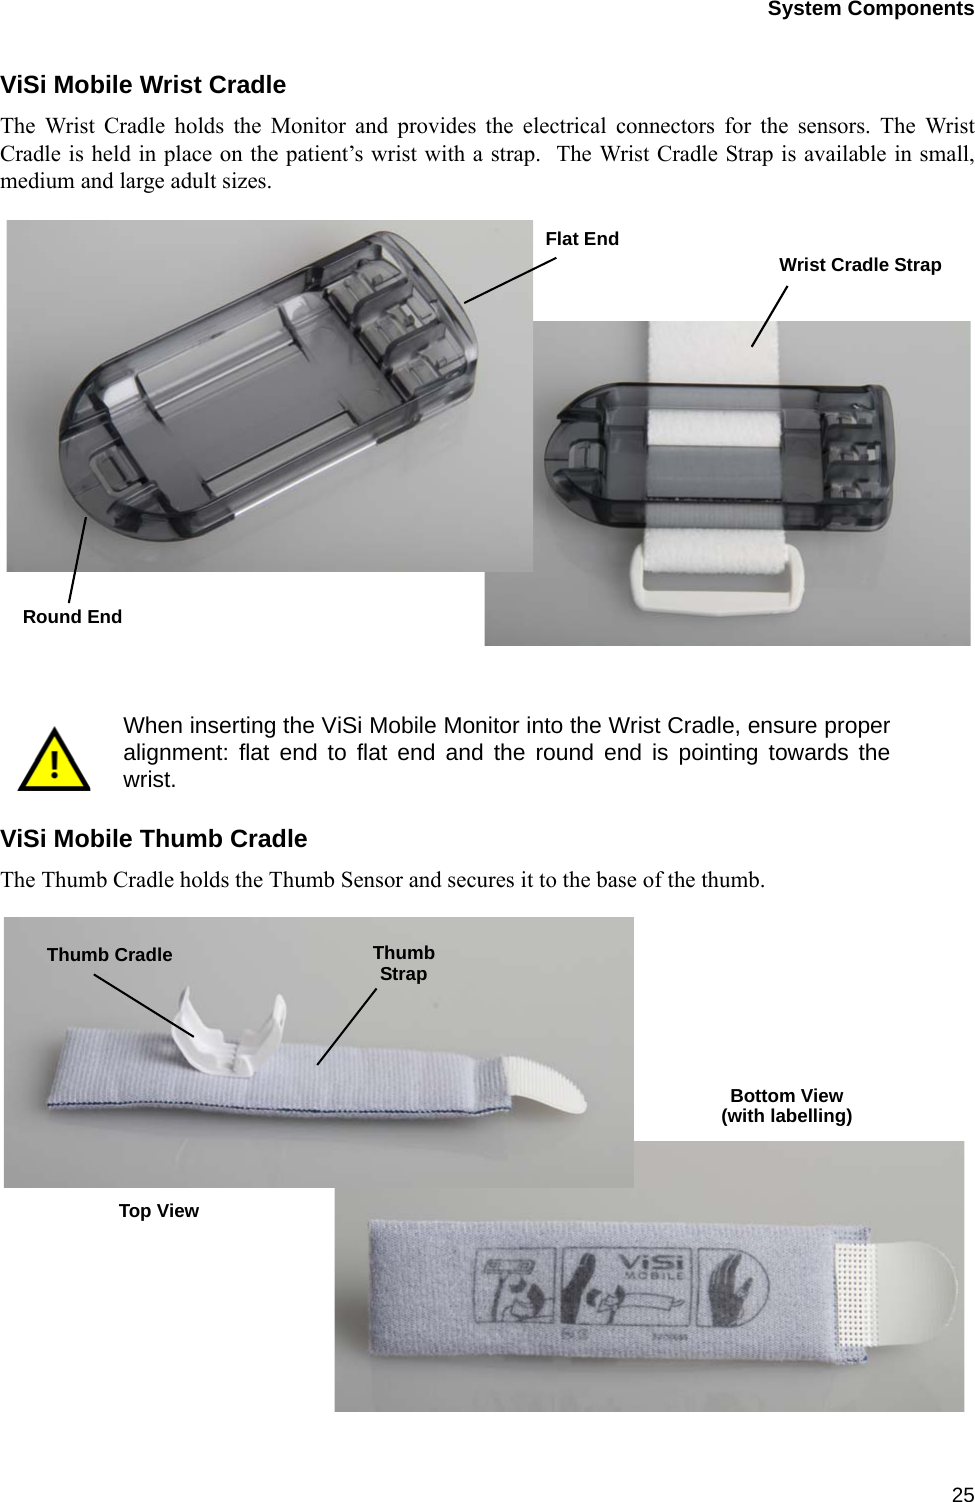 System Components25ViSi Mobile Wrist CradleThe Wrist Cradle holds the Monitor and provides the electrical connectors for the sensors. The WristCradle is held in place on the patient’s wrist with a strap.  The Wrist Cradle Strap is available in small,medium and large adult sizes. ViSi Mobile Thumb CradleThe Thumb Cradle holds the Thumb Sensor and secures it to the base of the thumb.When inserting the ViSi Mobile Monitor into the Wrist Cradle, ensure properalignment: flat end to flat end and the round end is pointing towards thewrist.Round EndFlat EndWrist Cradle StrapThumb Cradle ThumbStrapBottom View(with labelling)Top View